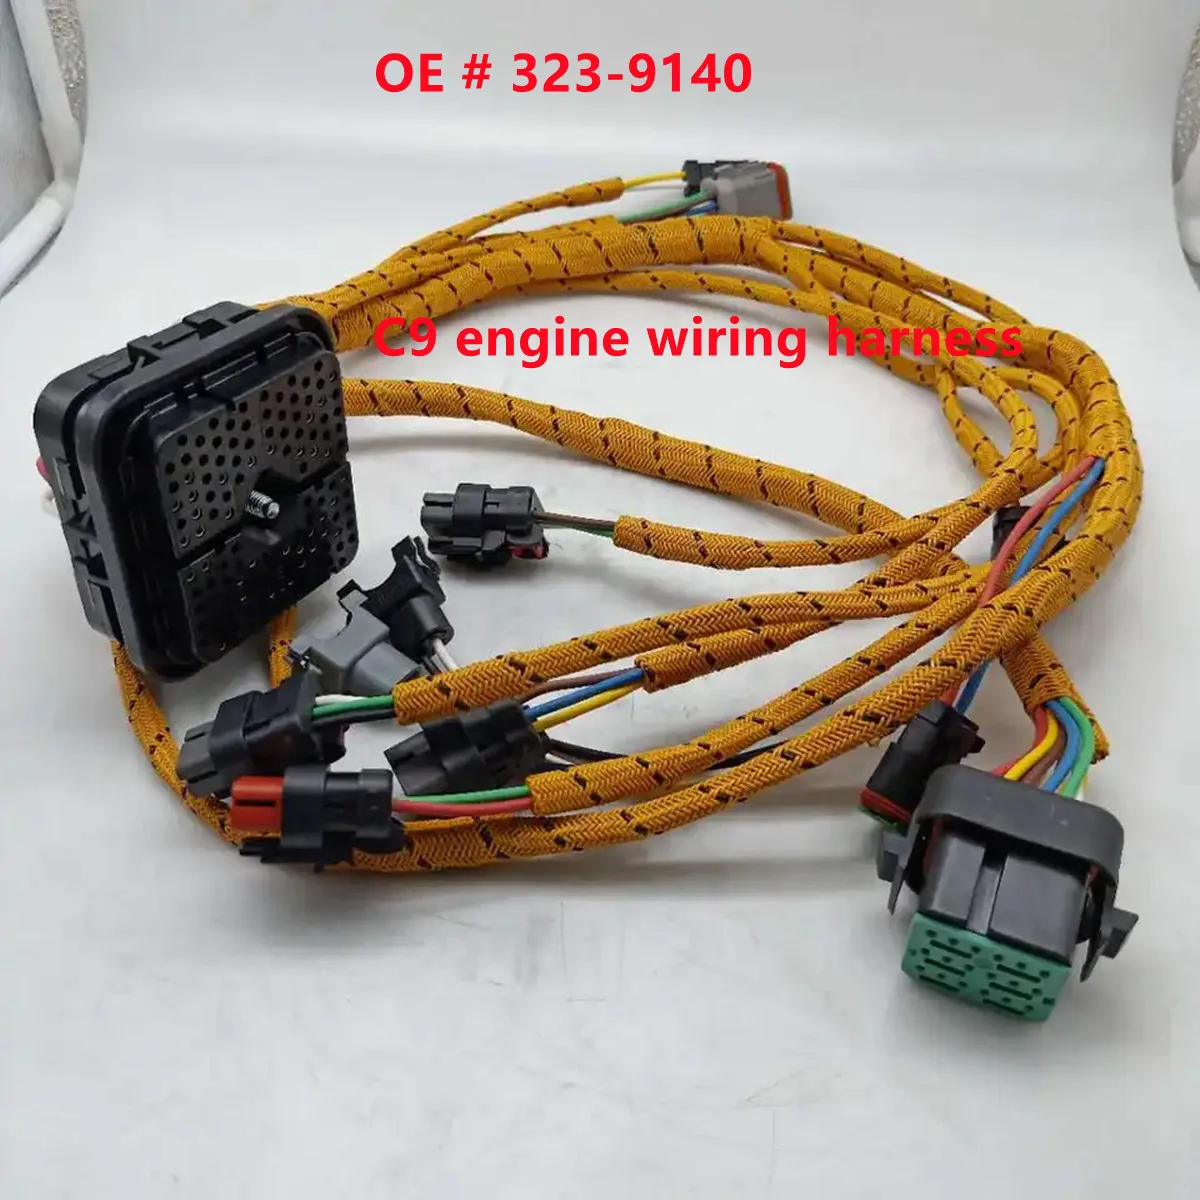 323-9140 3239140  New Engine Wiring Harness for CAT Excavator 330D/336D C9 Engin - £360.16 GBP